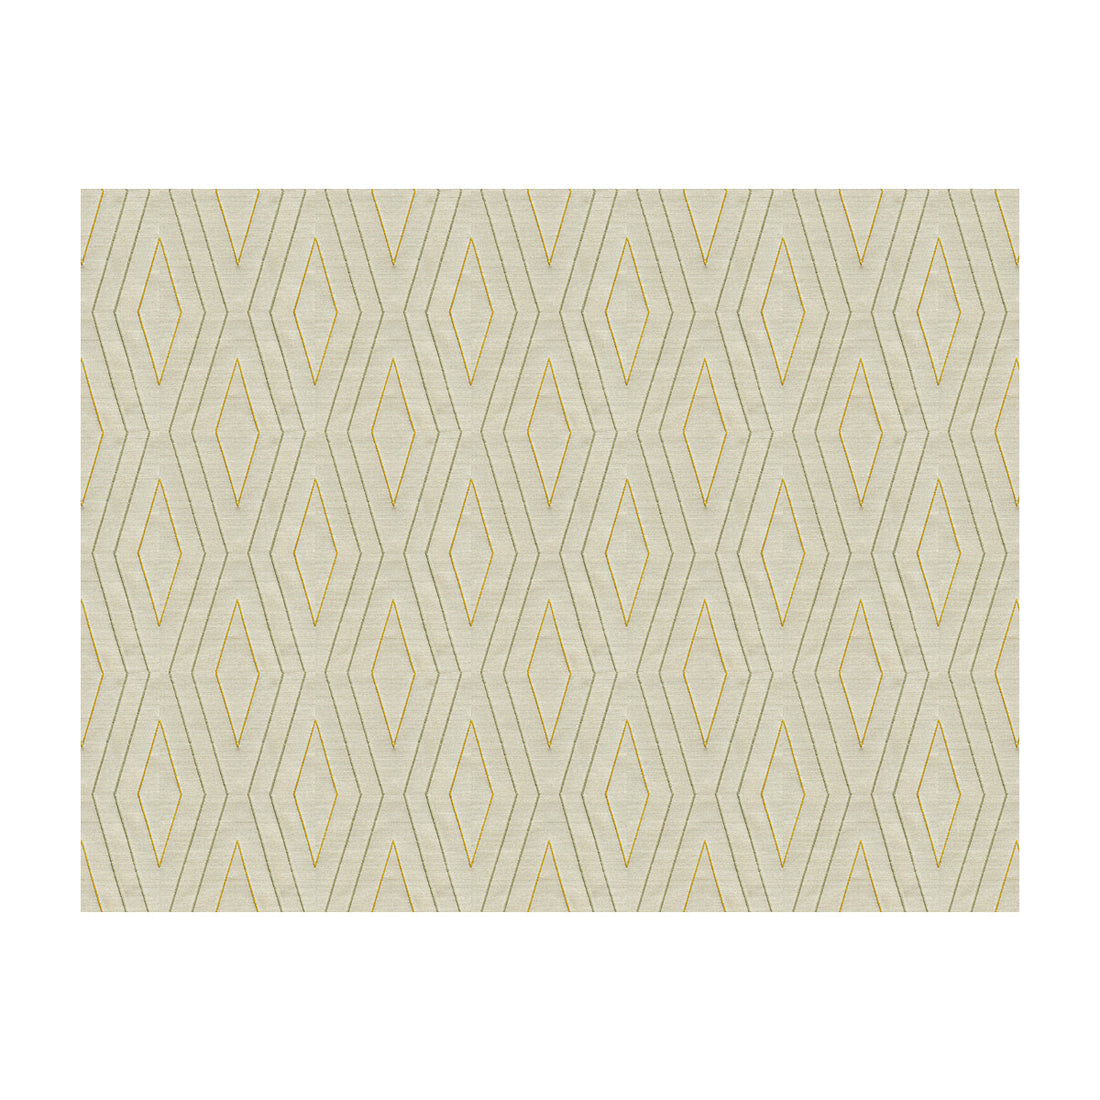 Electra fabric in luminaire color - pattern 33706.130.0 - by Kravet Couture in the Michael Berman II Collection collection